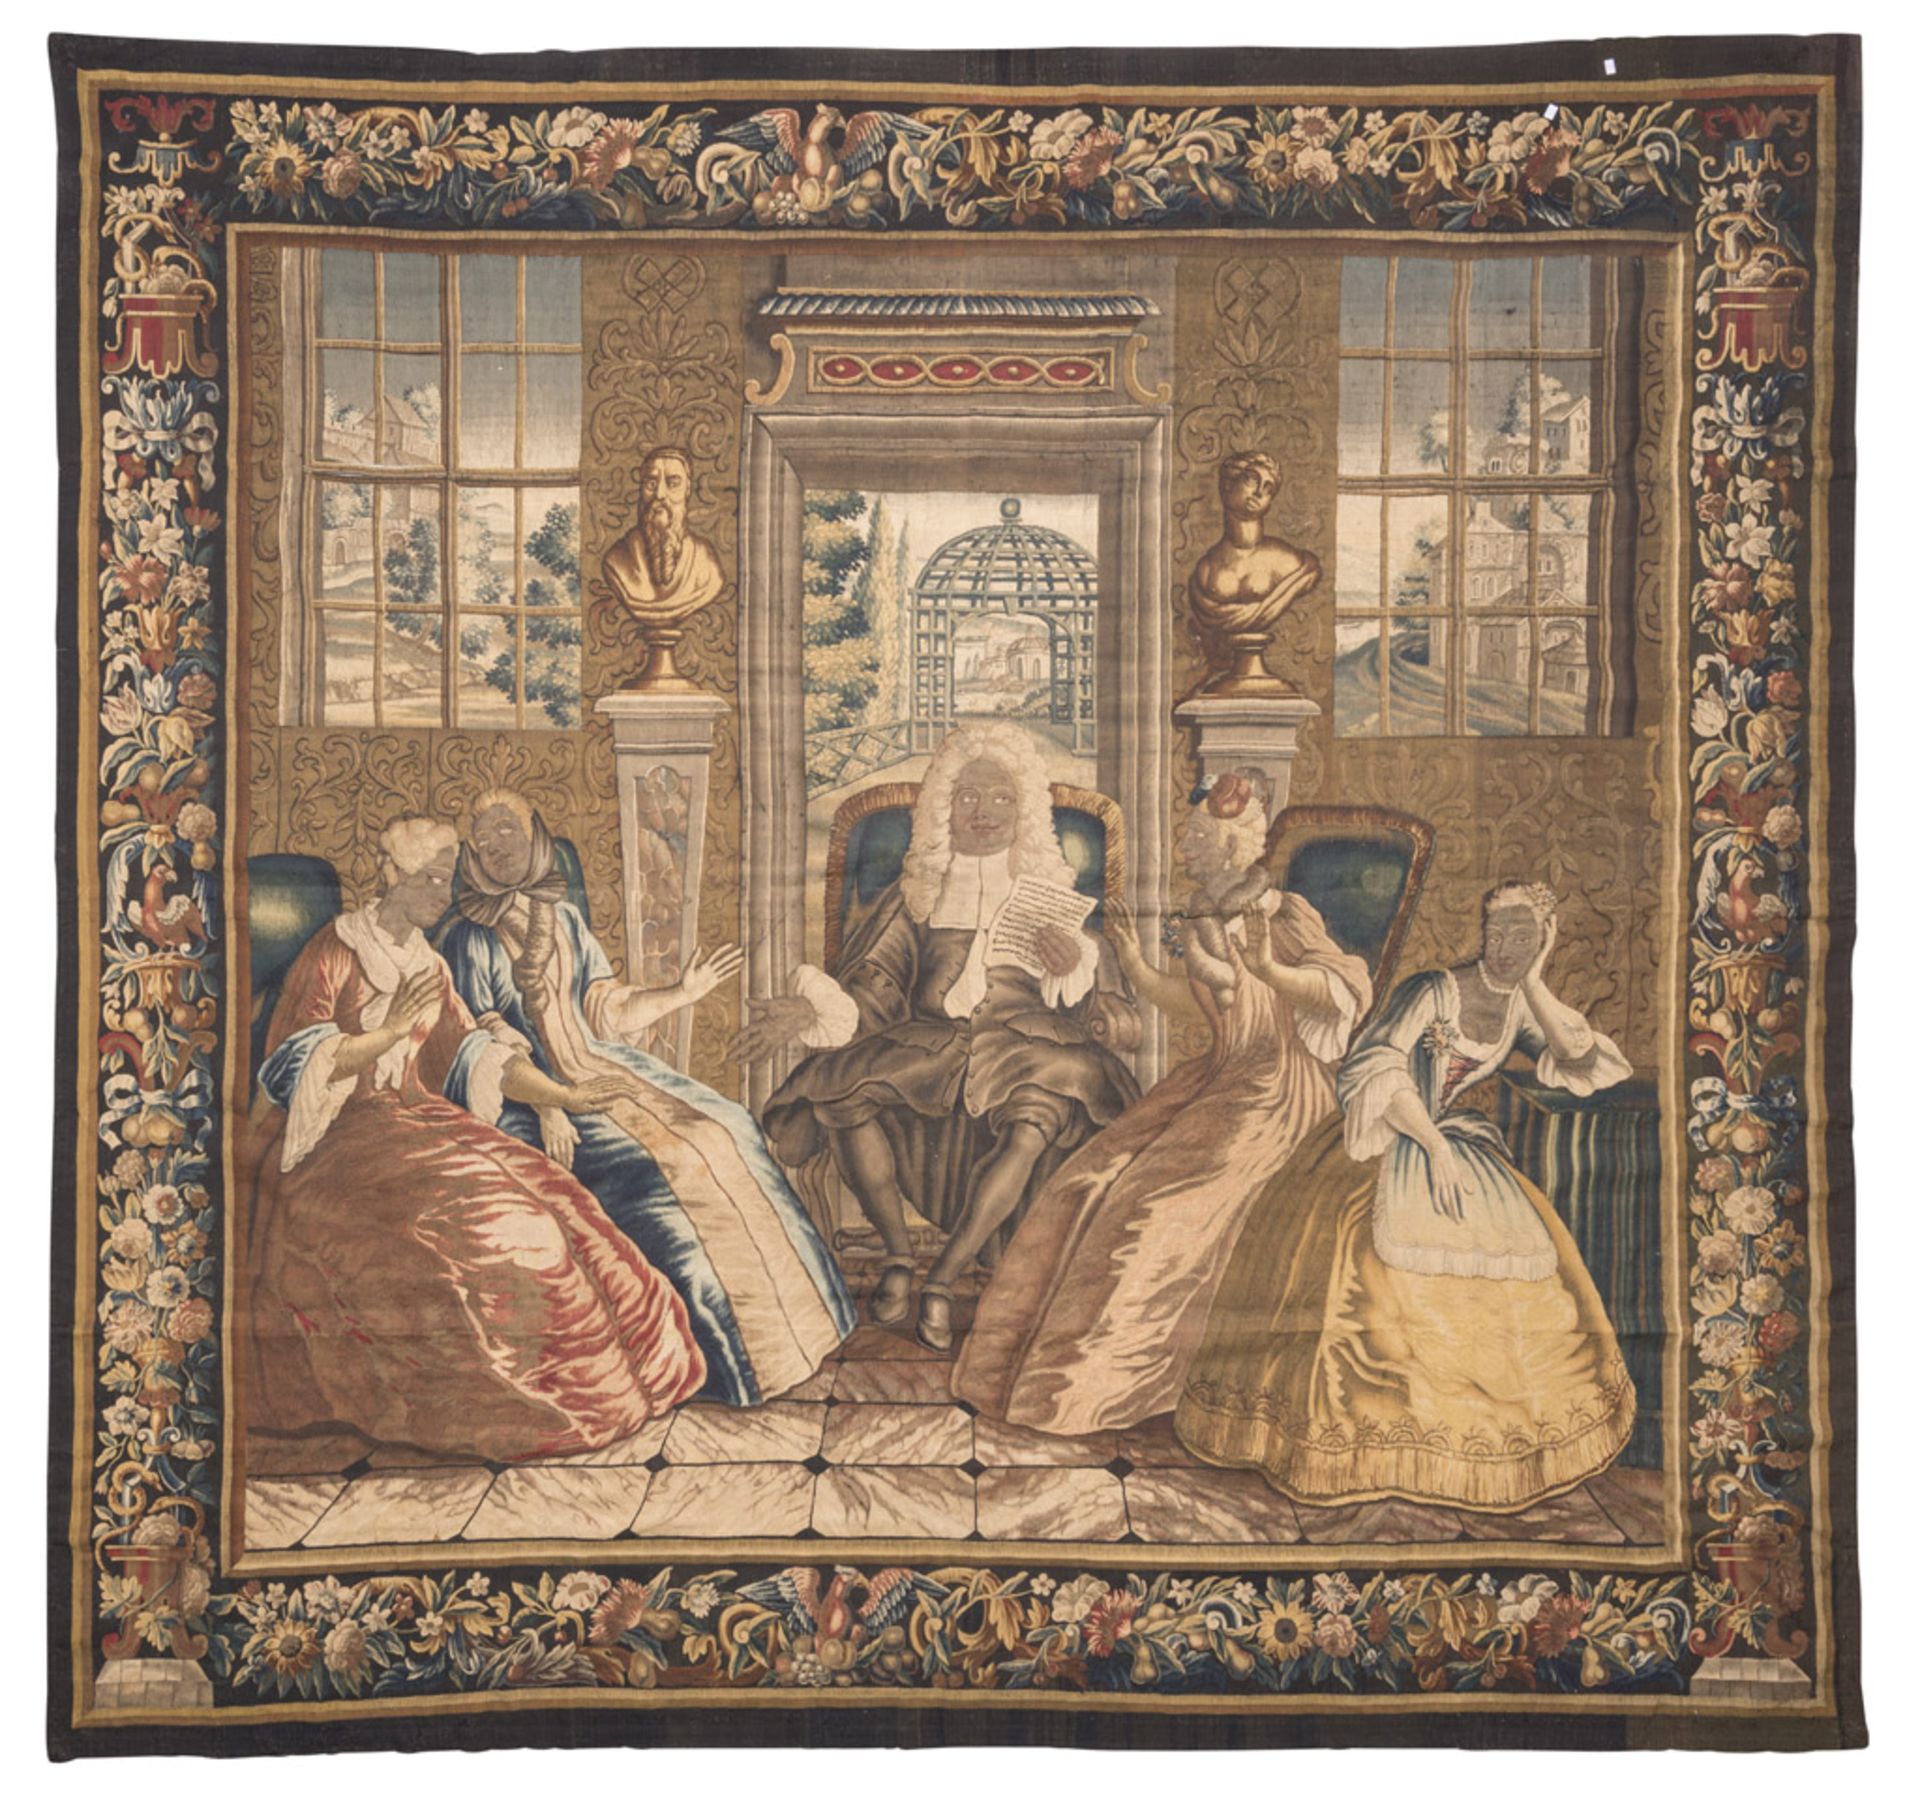 FRENCH SCHOOL, EARLY 18TH CENTURY READING THE LAST WILL Aubusson tapestry, cm. 330 x 350